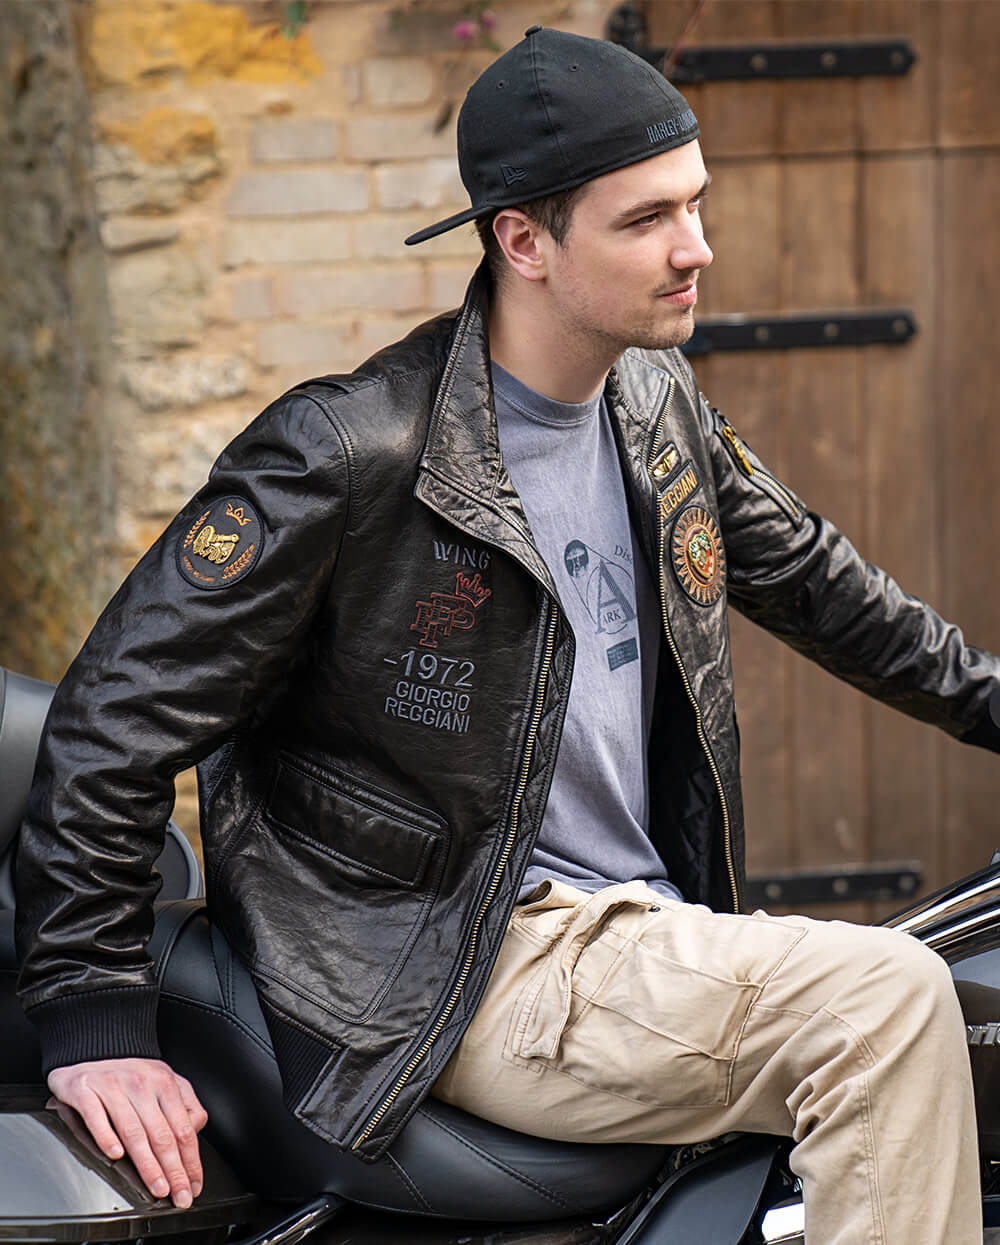 Men's Fashionable Embroidery Leather Jacket